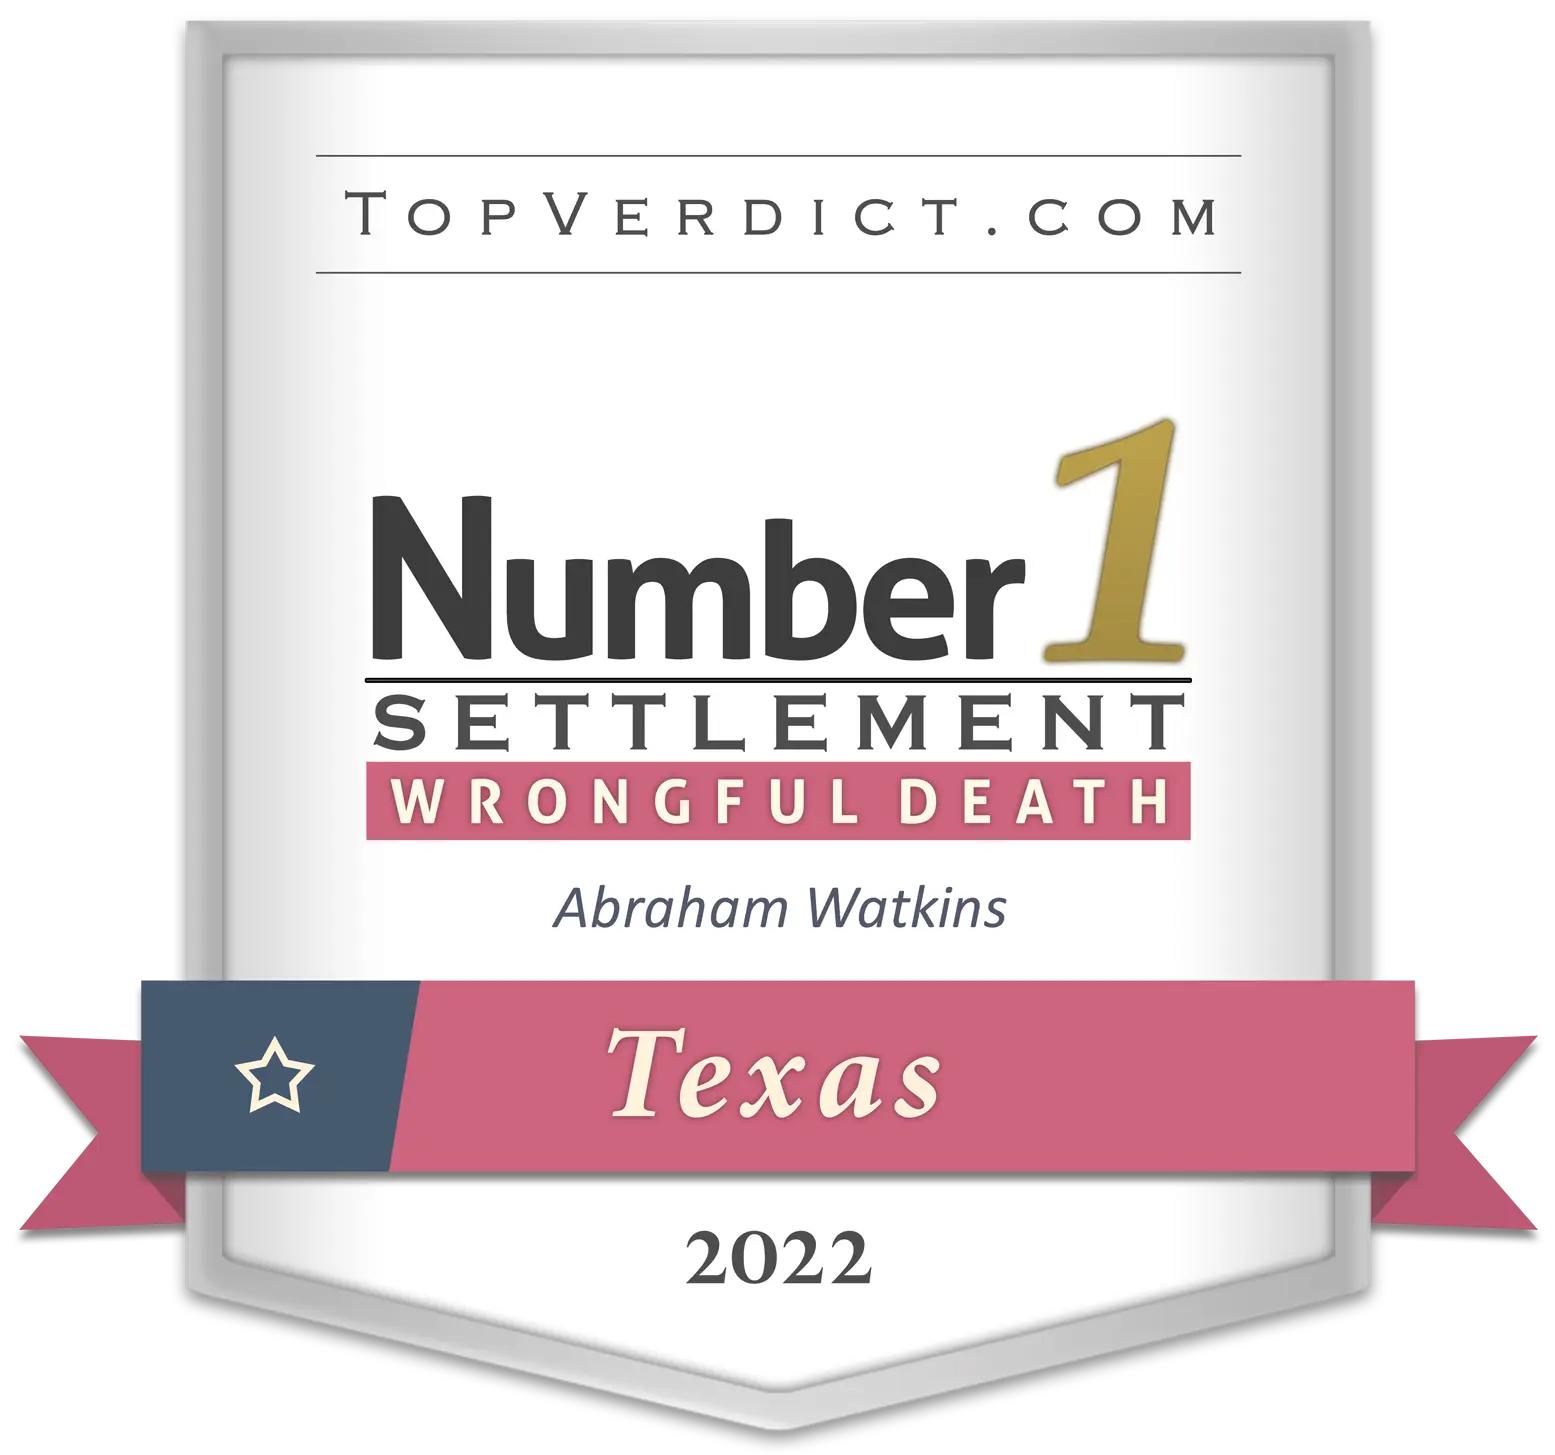 Number 1 settlement for wrongful death in Texas 2022.